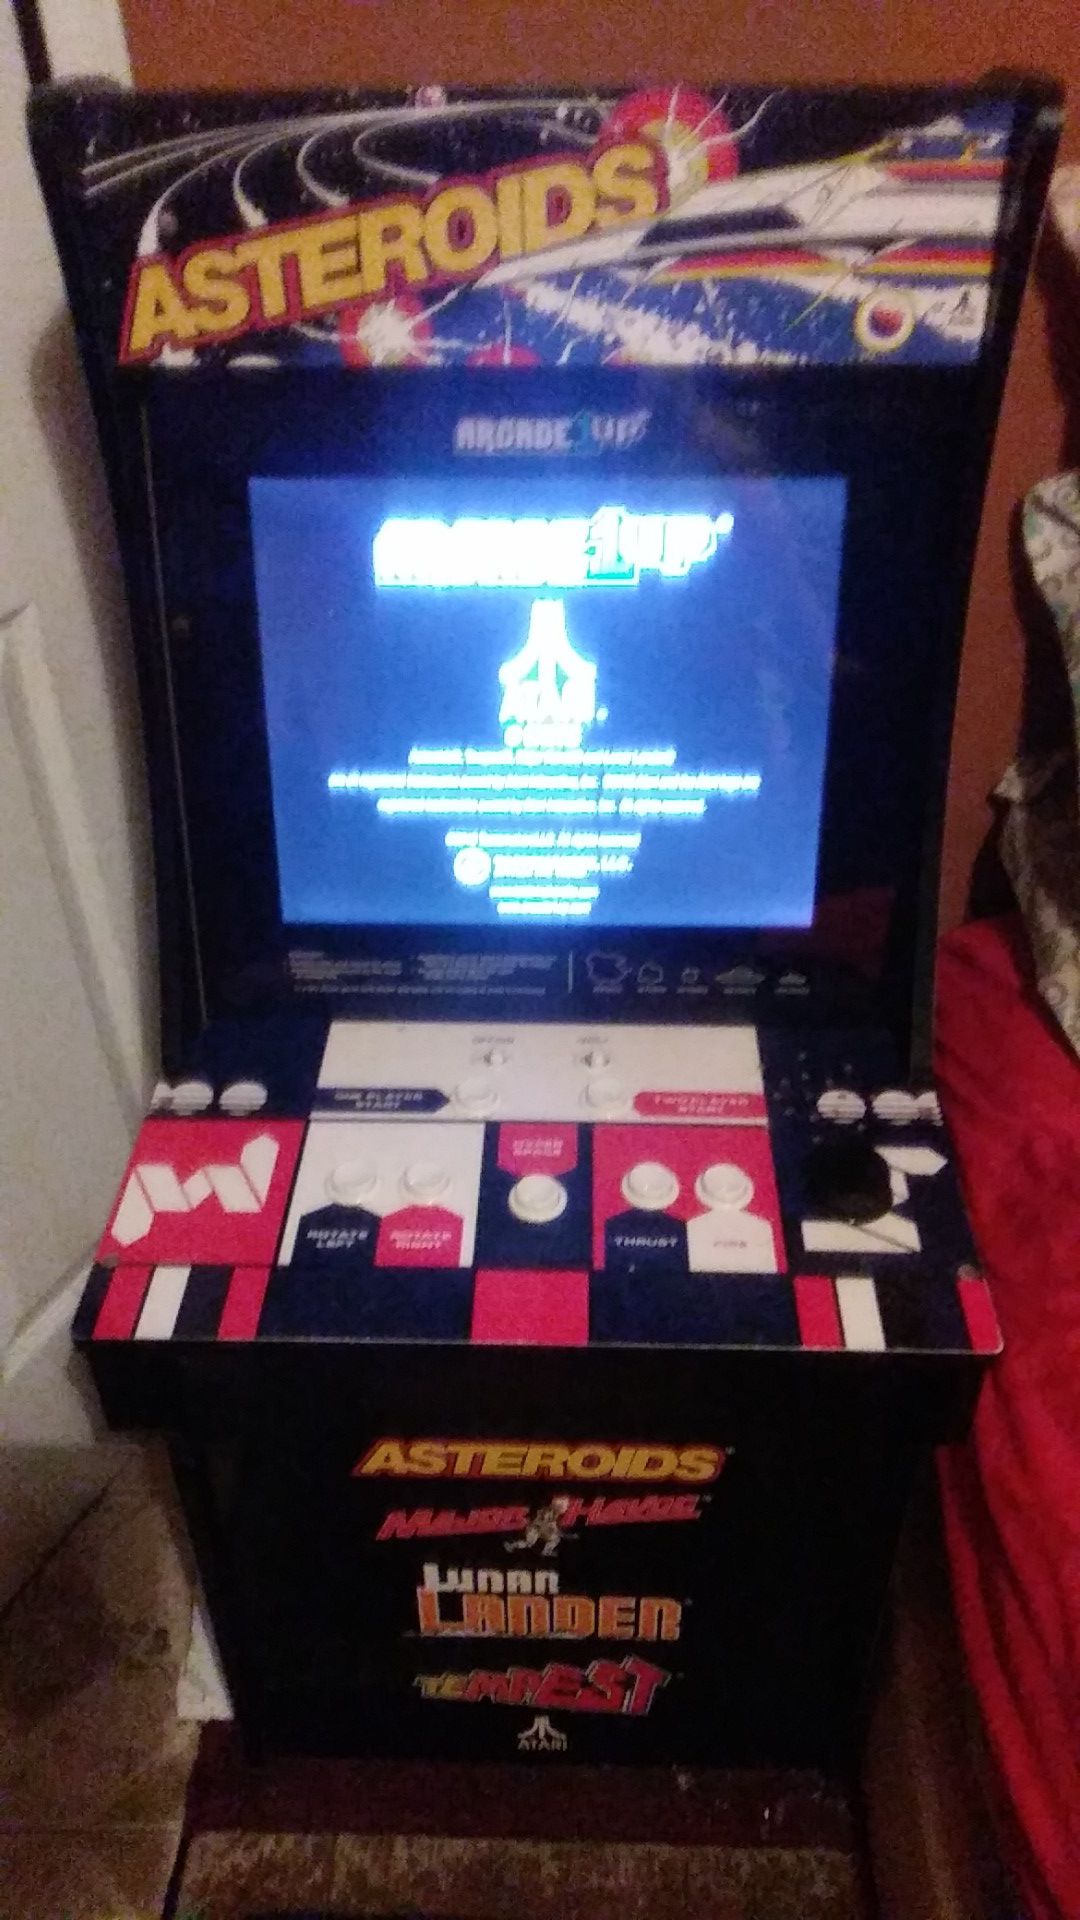 Asteroids arcade 4 games in great condition games are asteroids,major havoc,lunar ladder,and tempest 1 and 2 players need gone